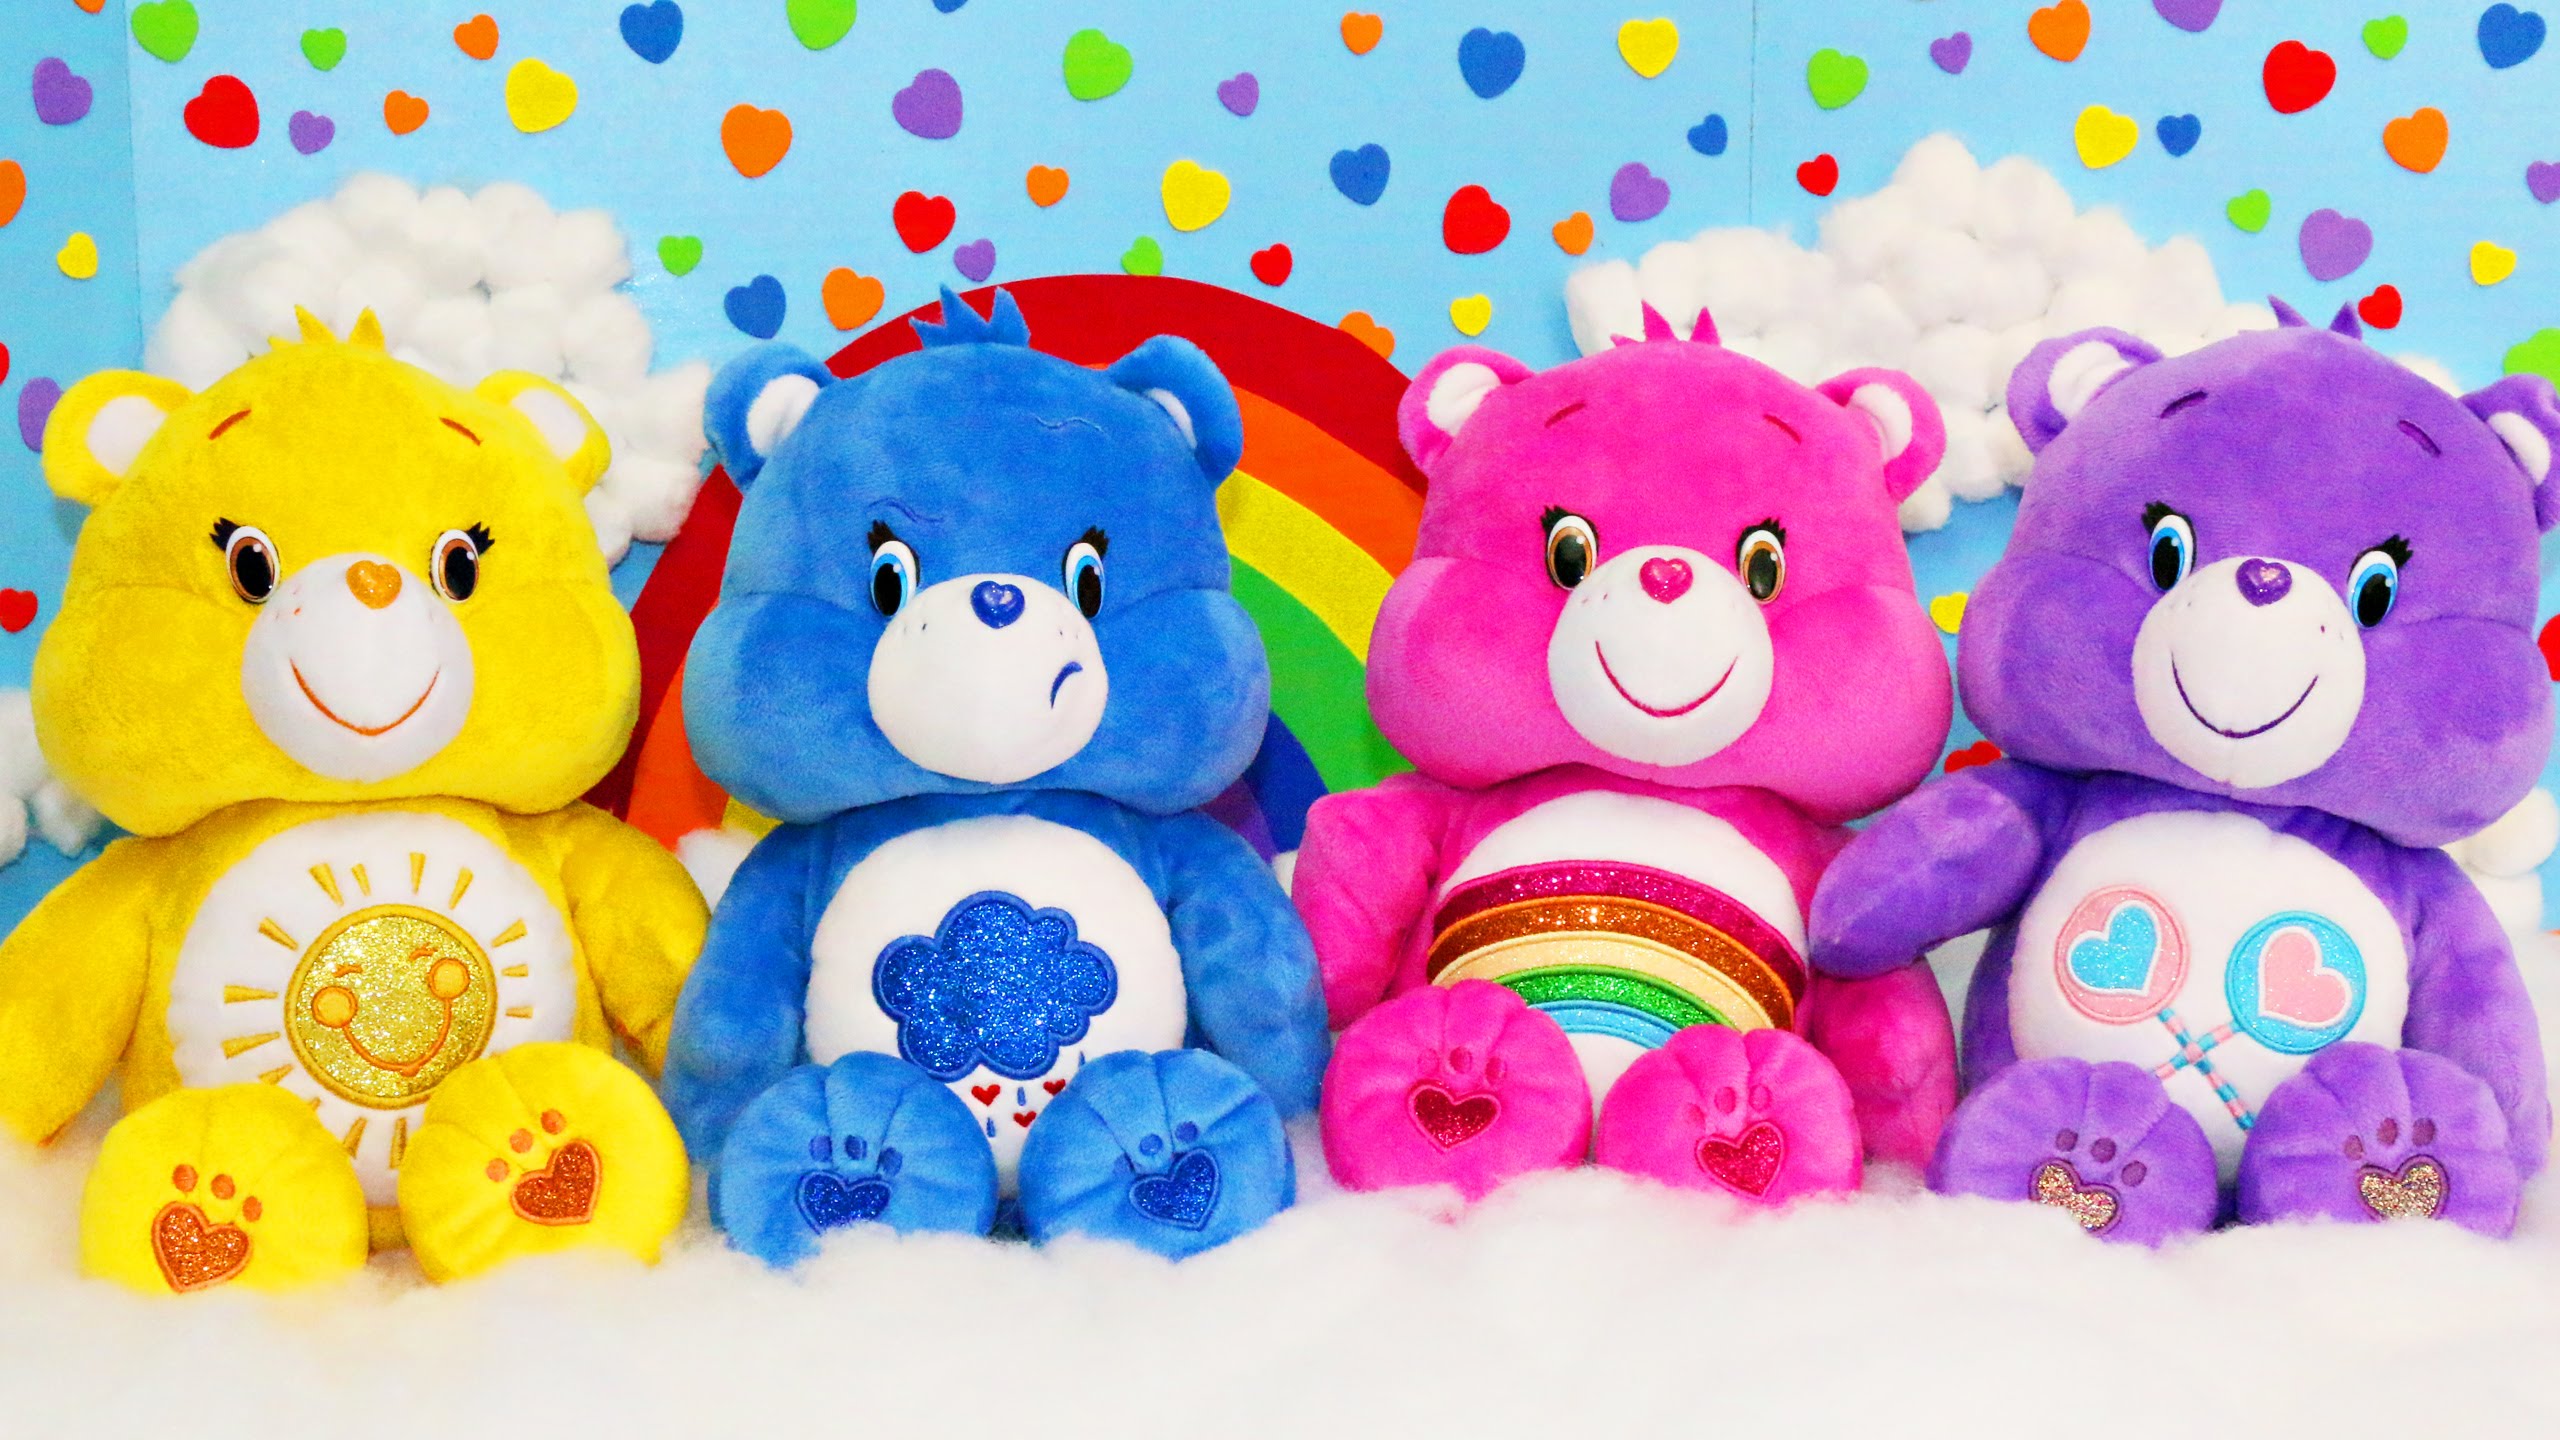 Amazing Care Bears Pictures & Backgrounds